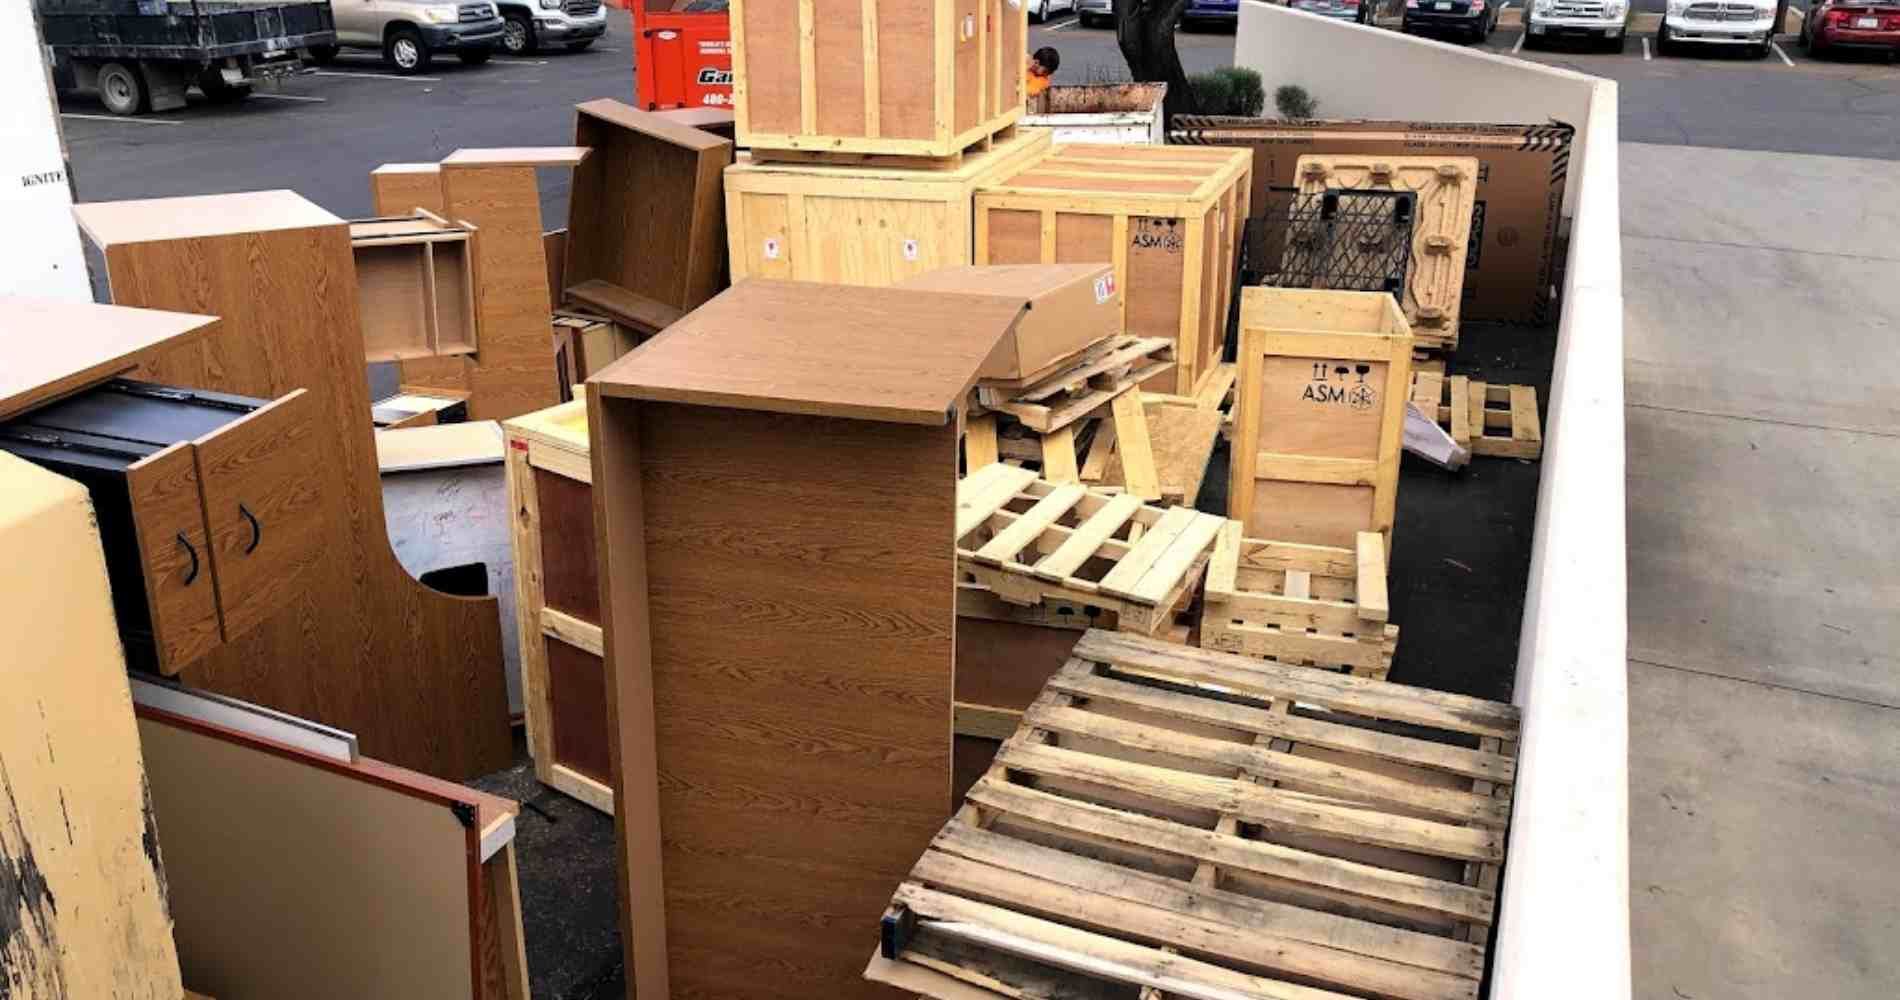 #1 for Pallet Disposal in Chandler, AZ With Over 1200 5-Star Reviews!